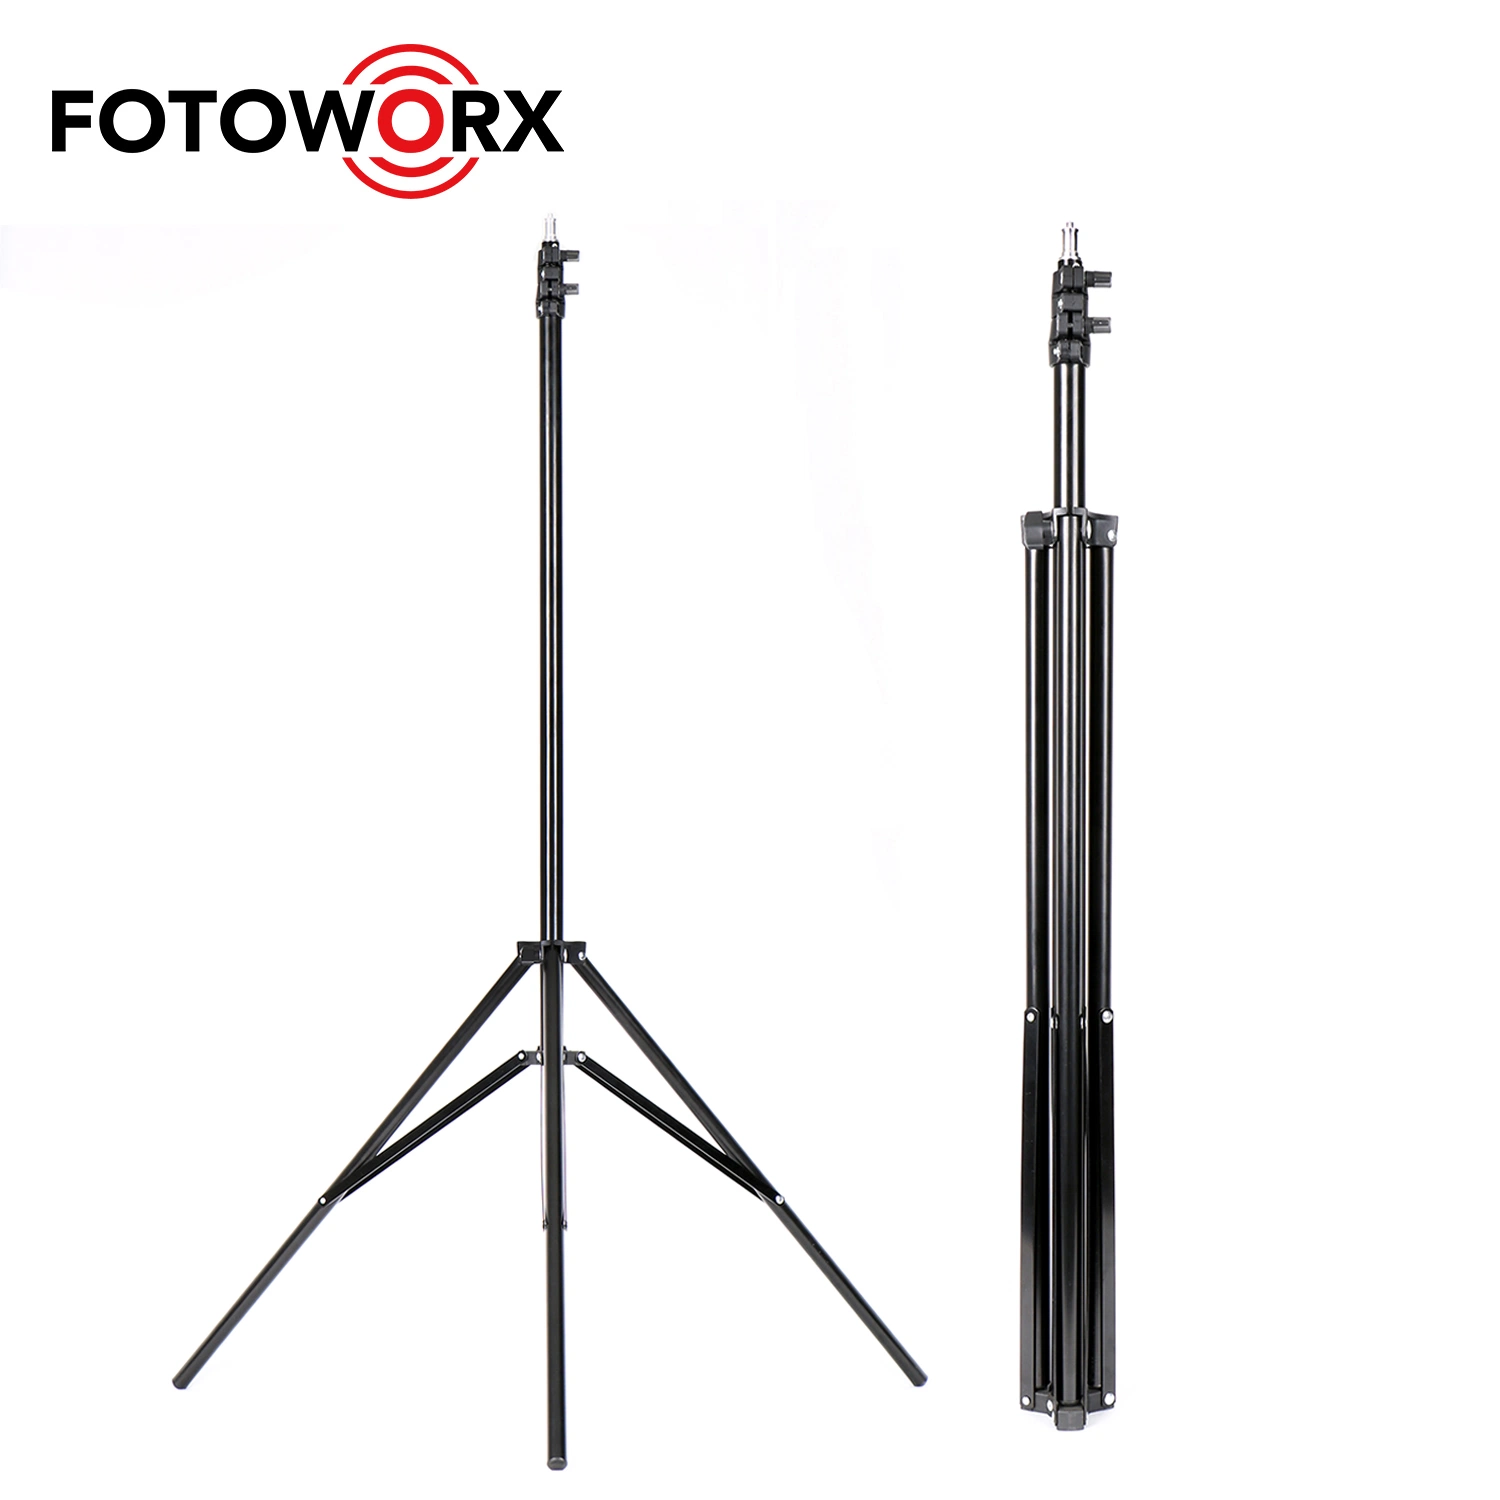 Fotoworx 260cm Light Stand for Studio Lights and Ring Lights